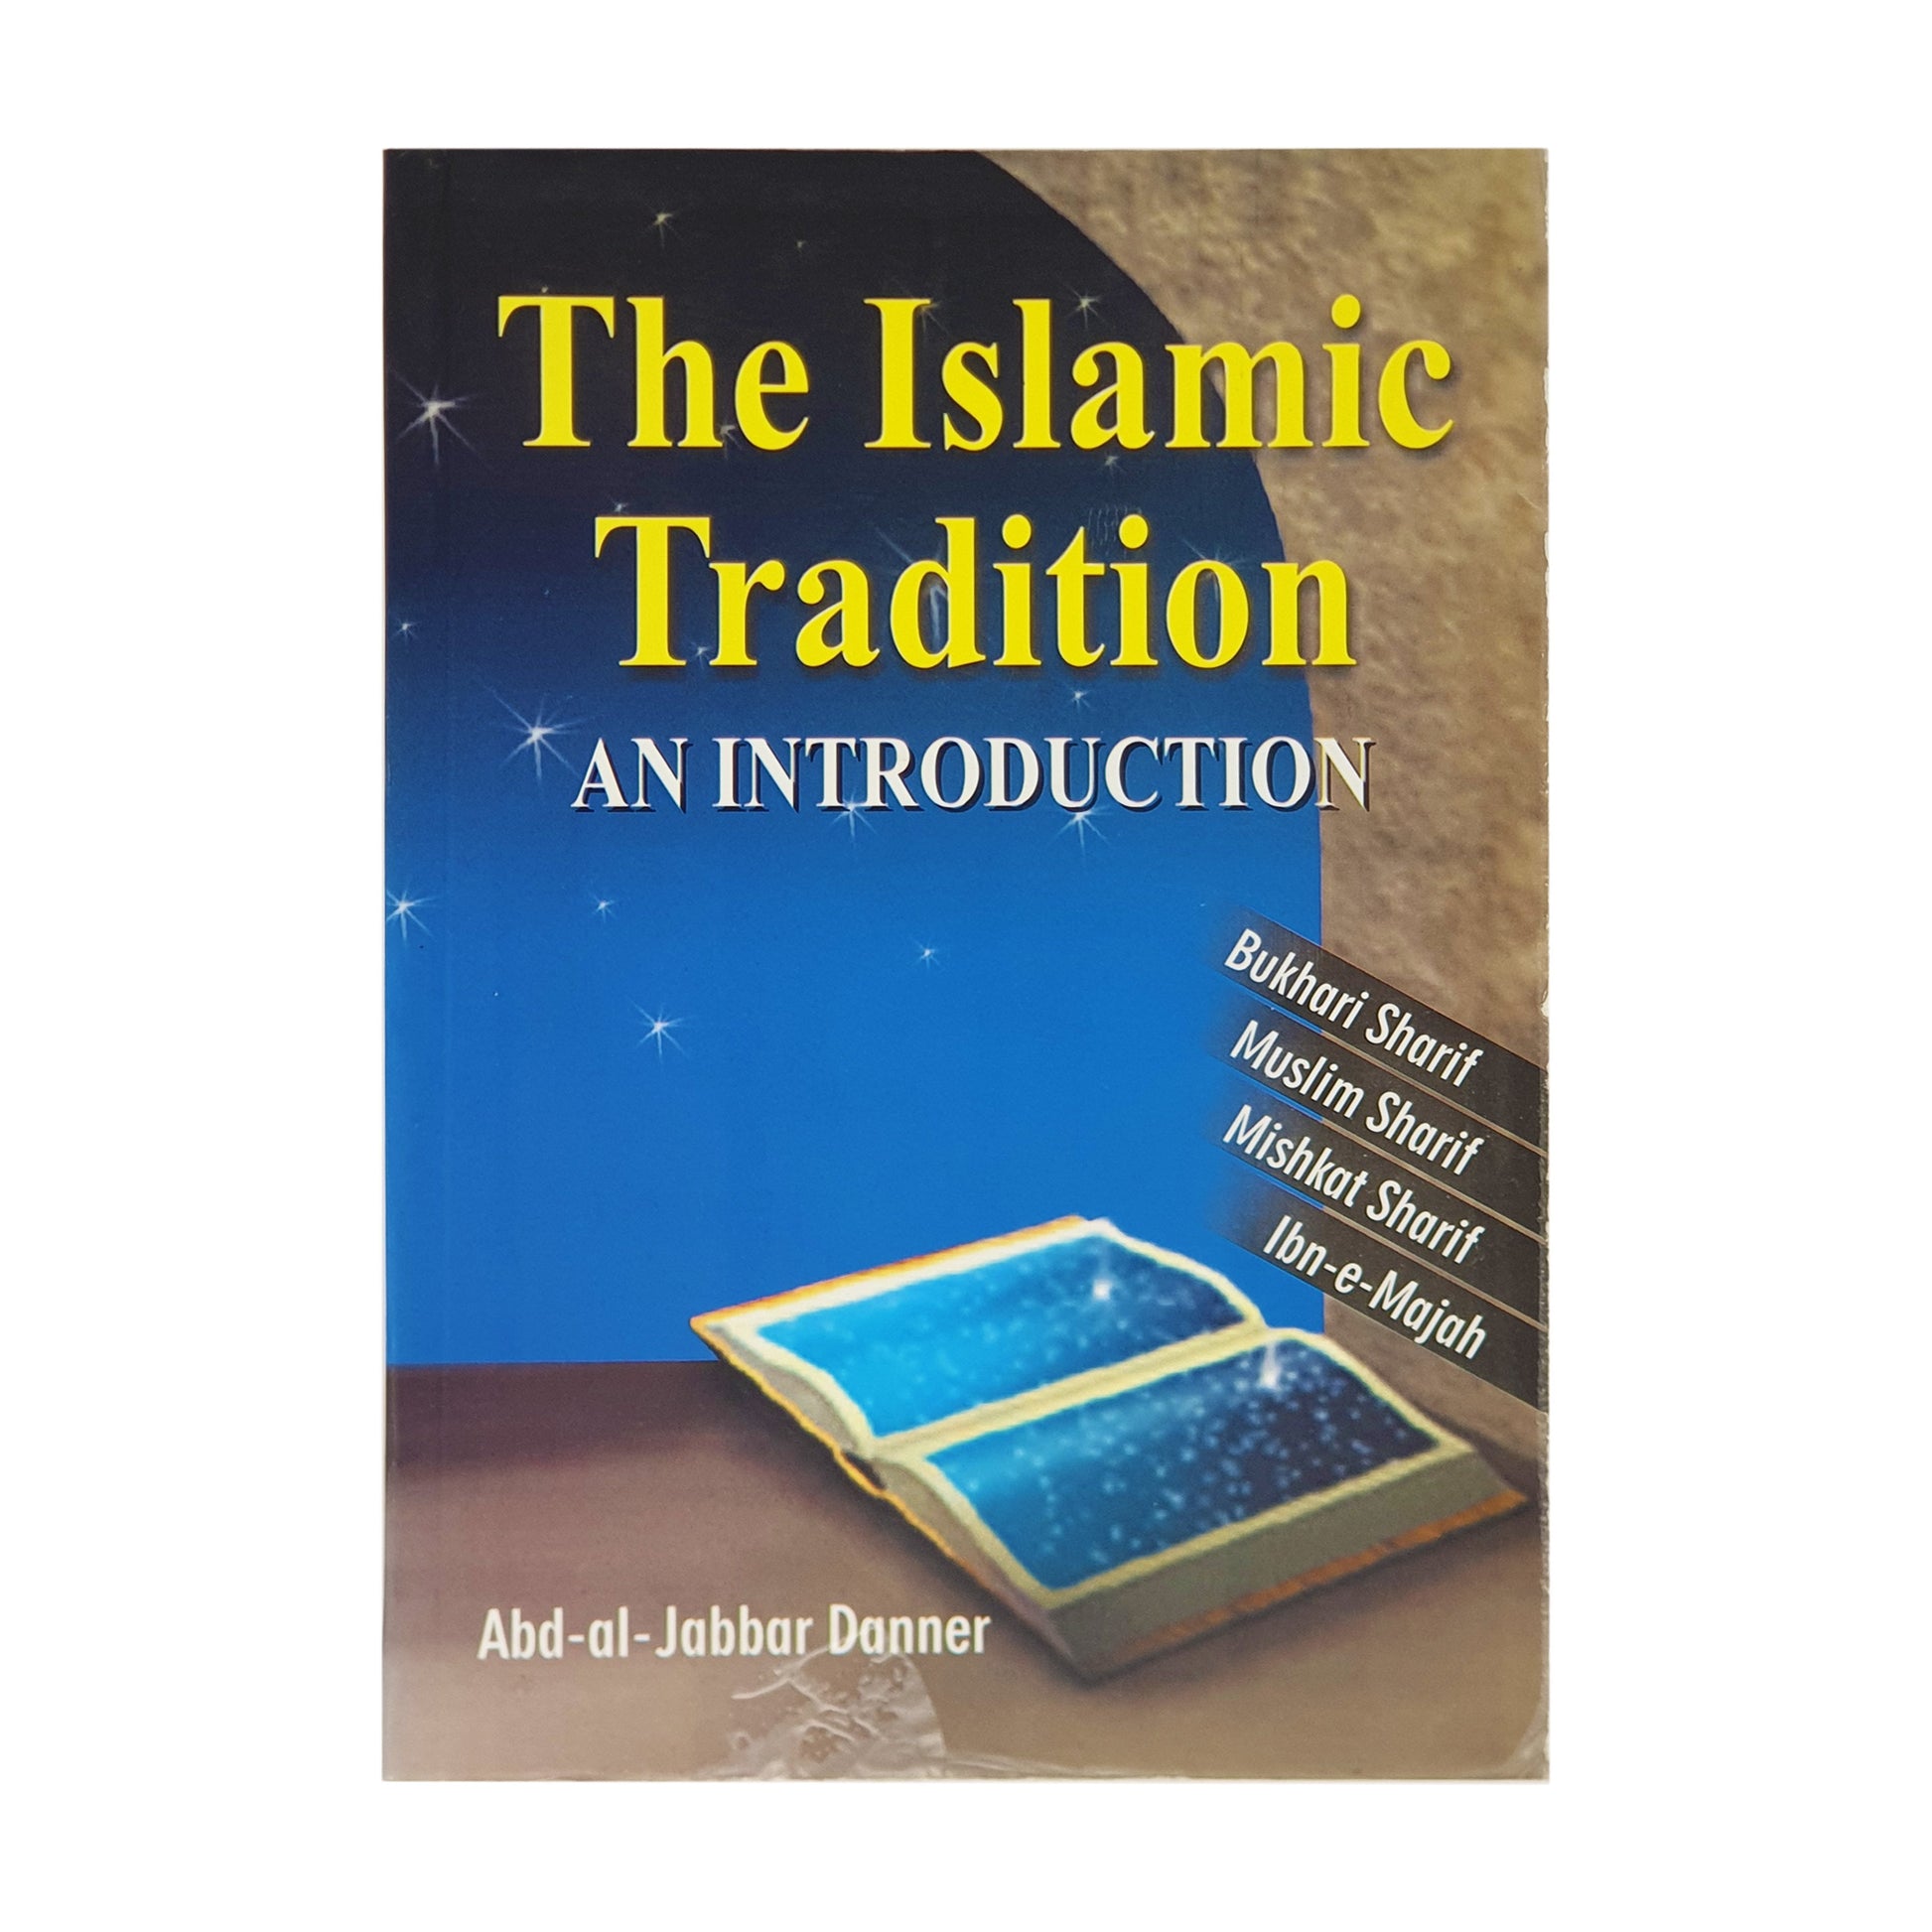 The Islamic Tradition - An Introduction